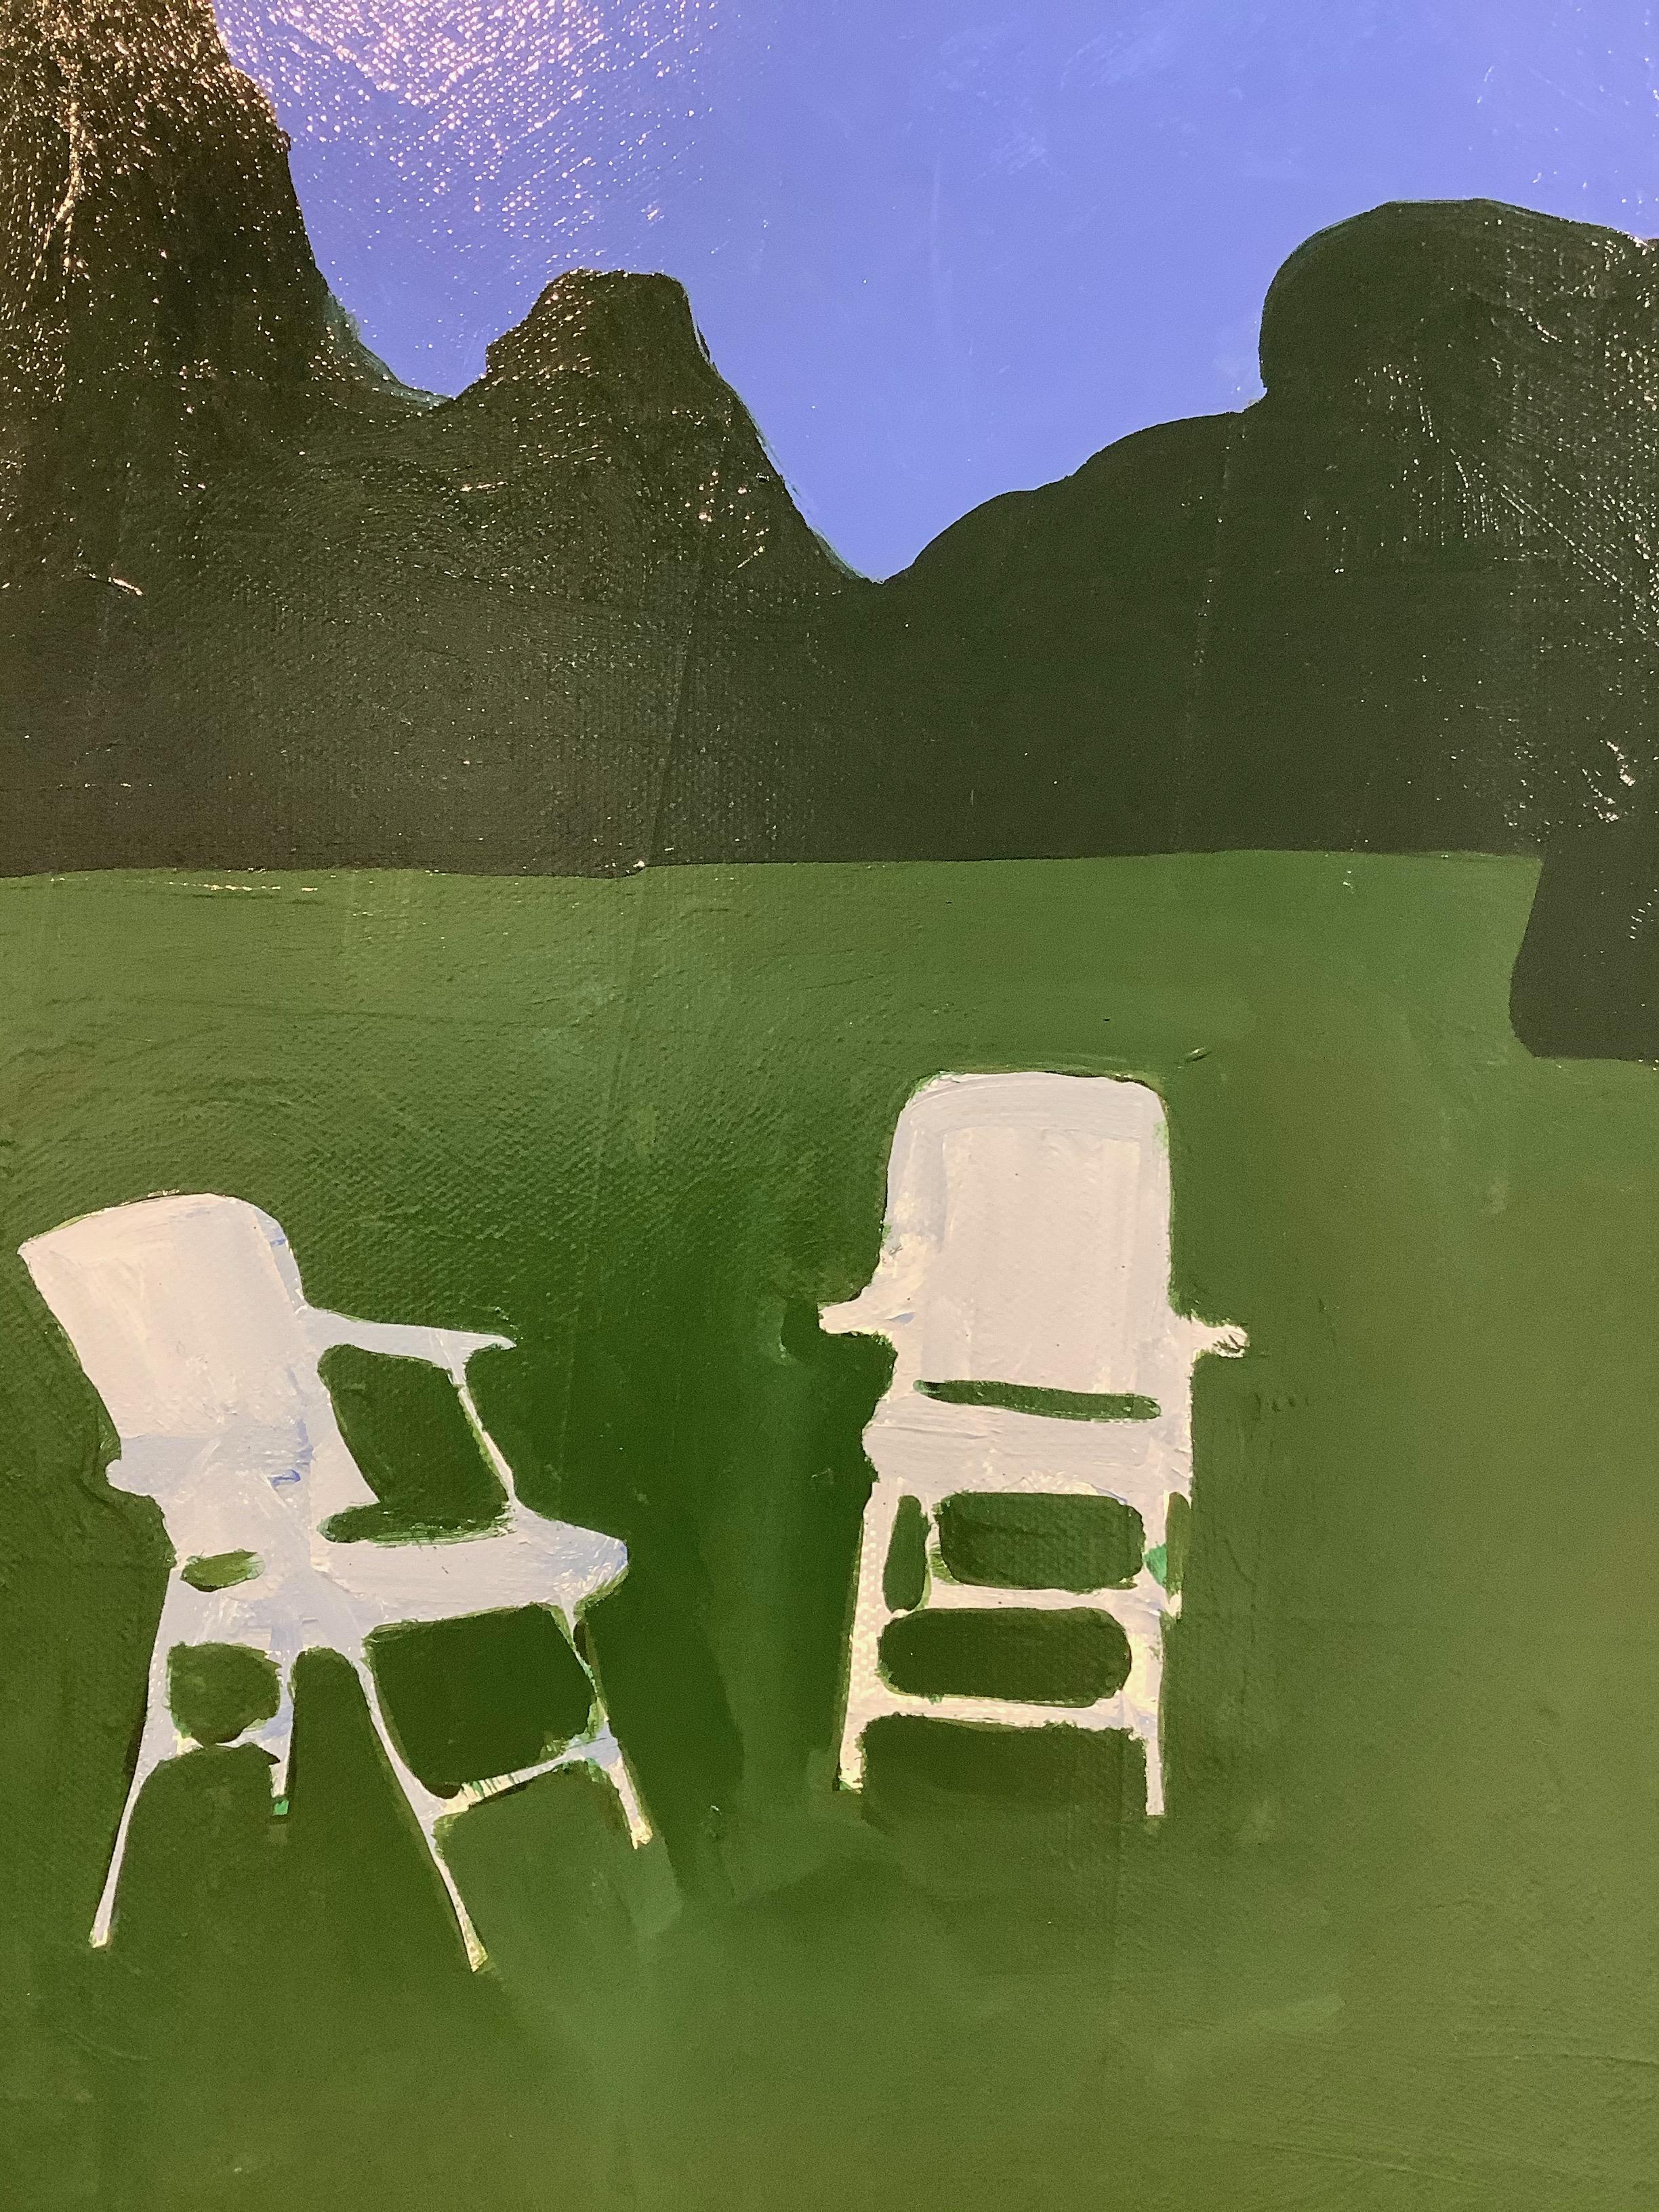 Chairs in Chief Michigan, Blue, Green Night Landscape Painting, Lawn and House 1